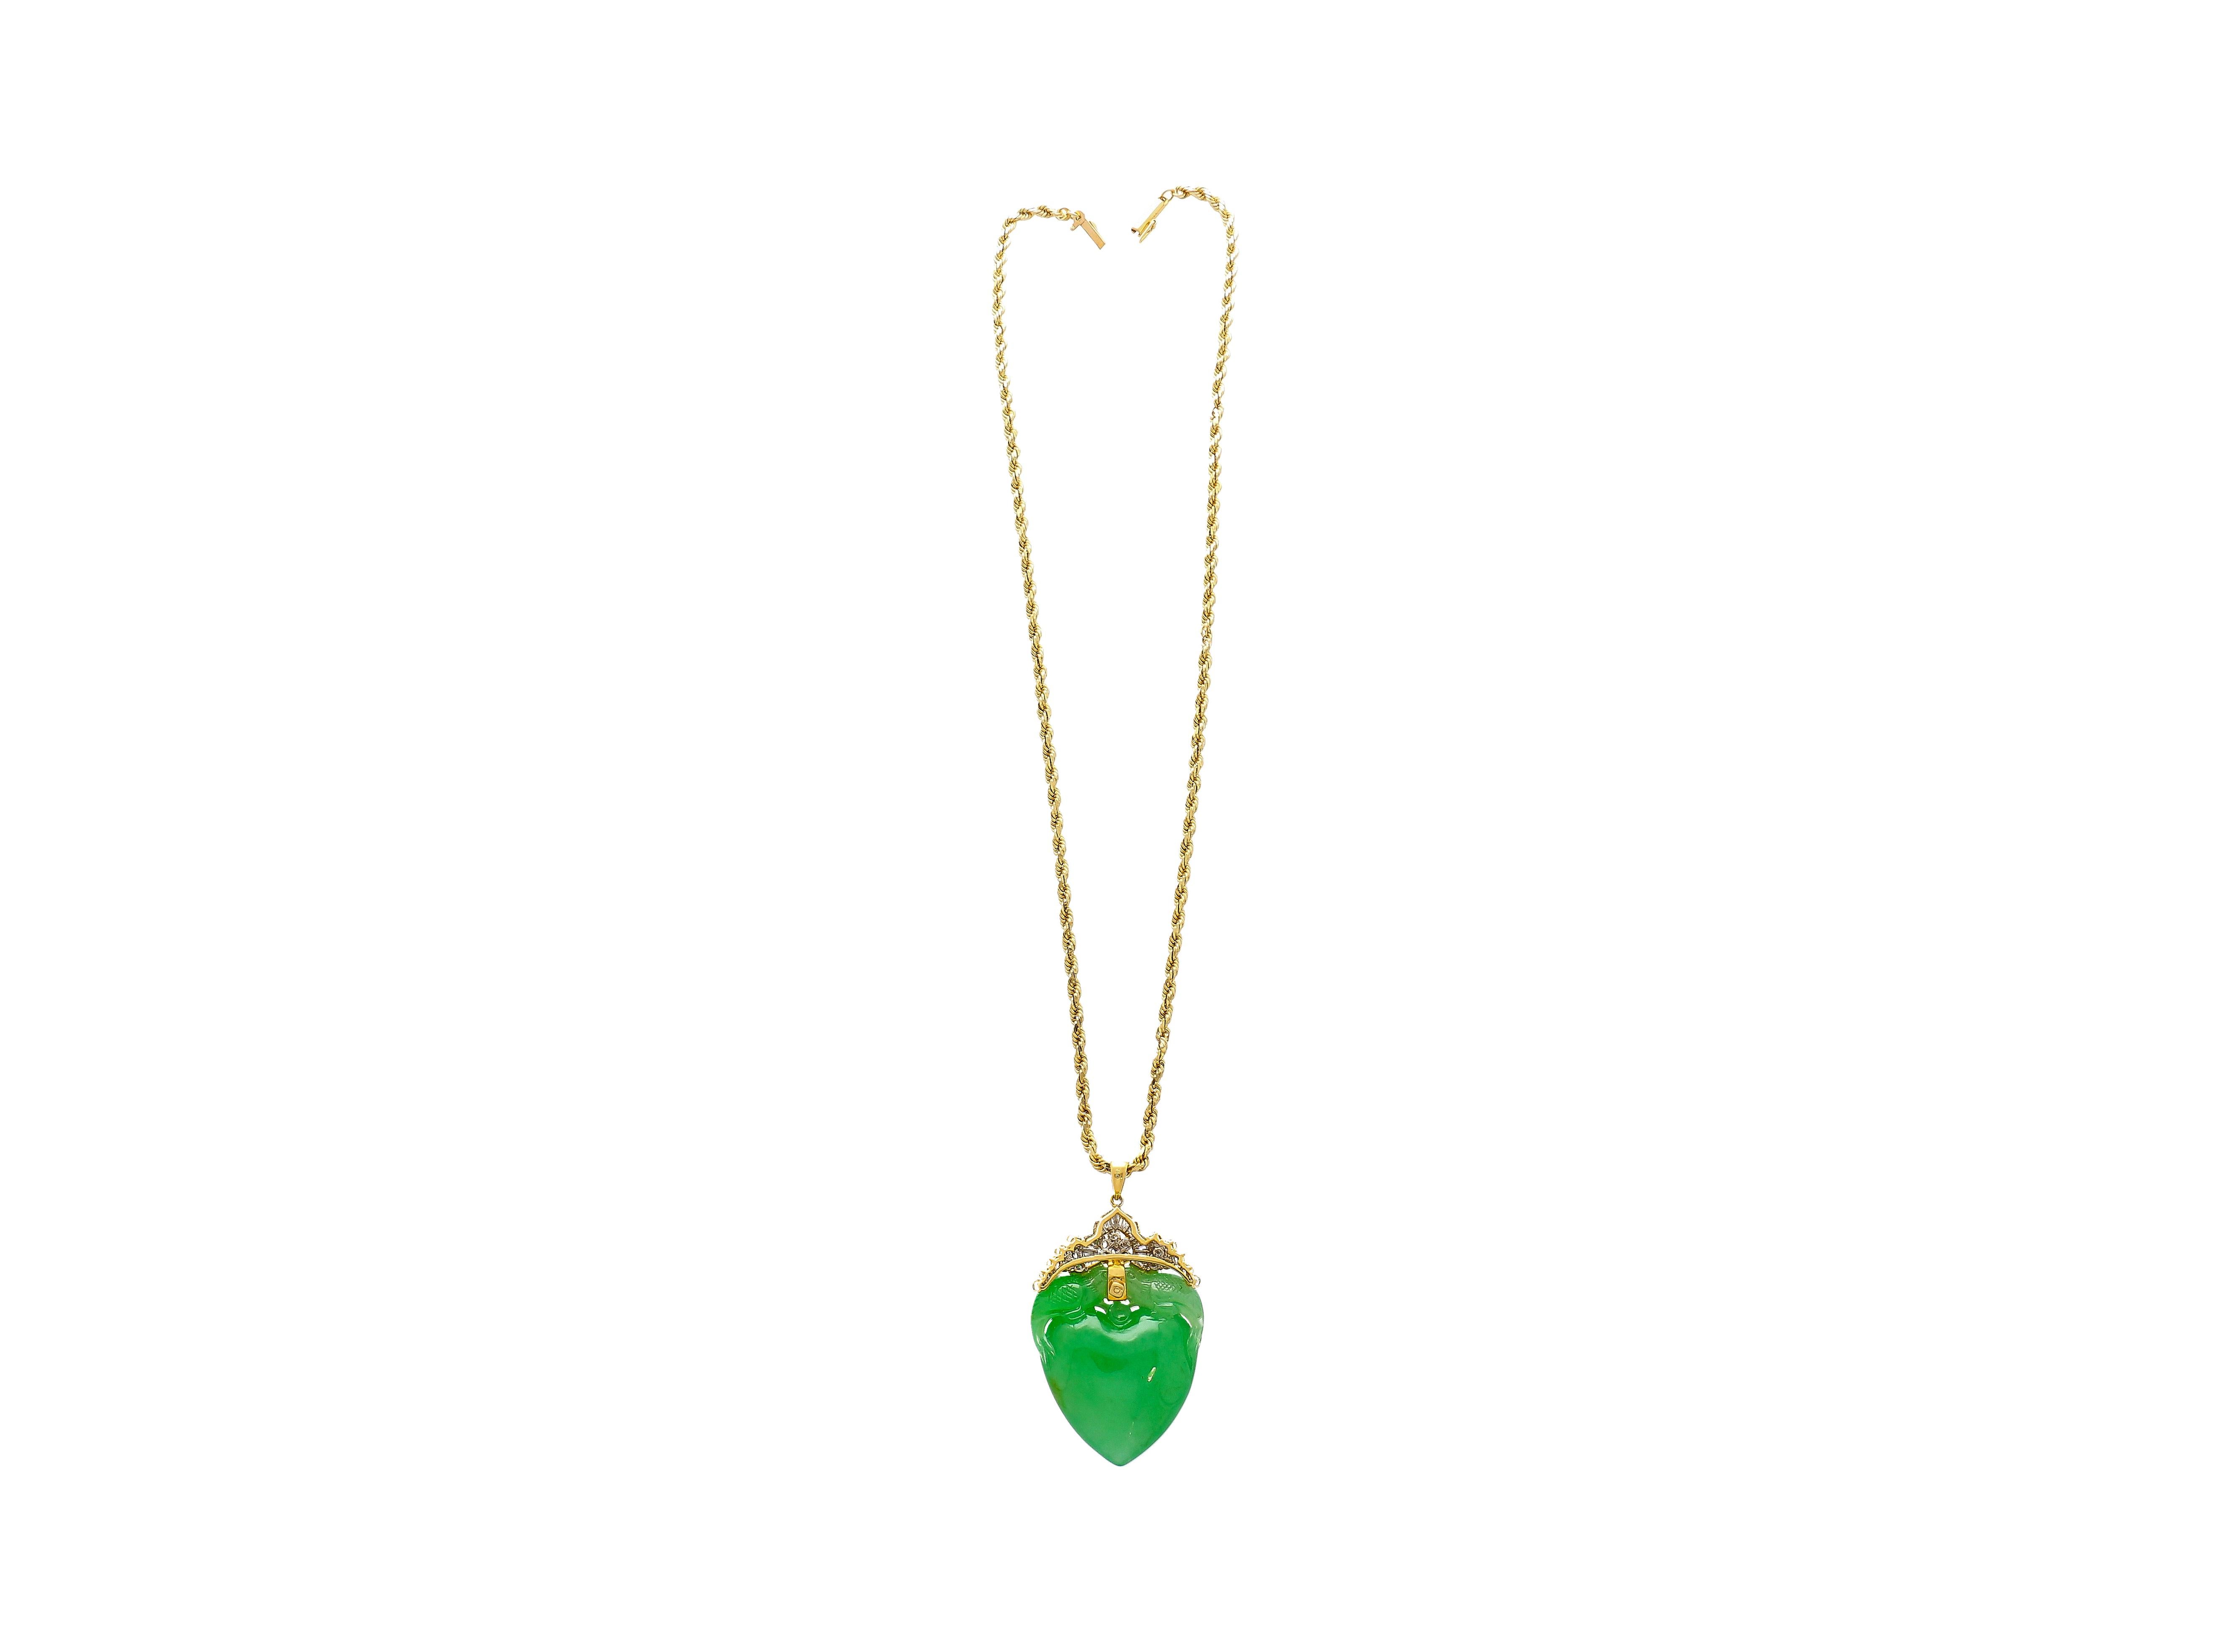 Discover a symbol of love and elegance with this Jadeite Jade pendant necklace. Crafted in 18K Yellow Gold, this exquisite piece showcases a heart-shaped carved green jade pendant, displaying a wonderful two-bird feeding motif carving. Symbolic of